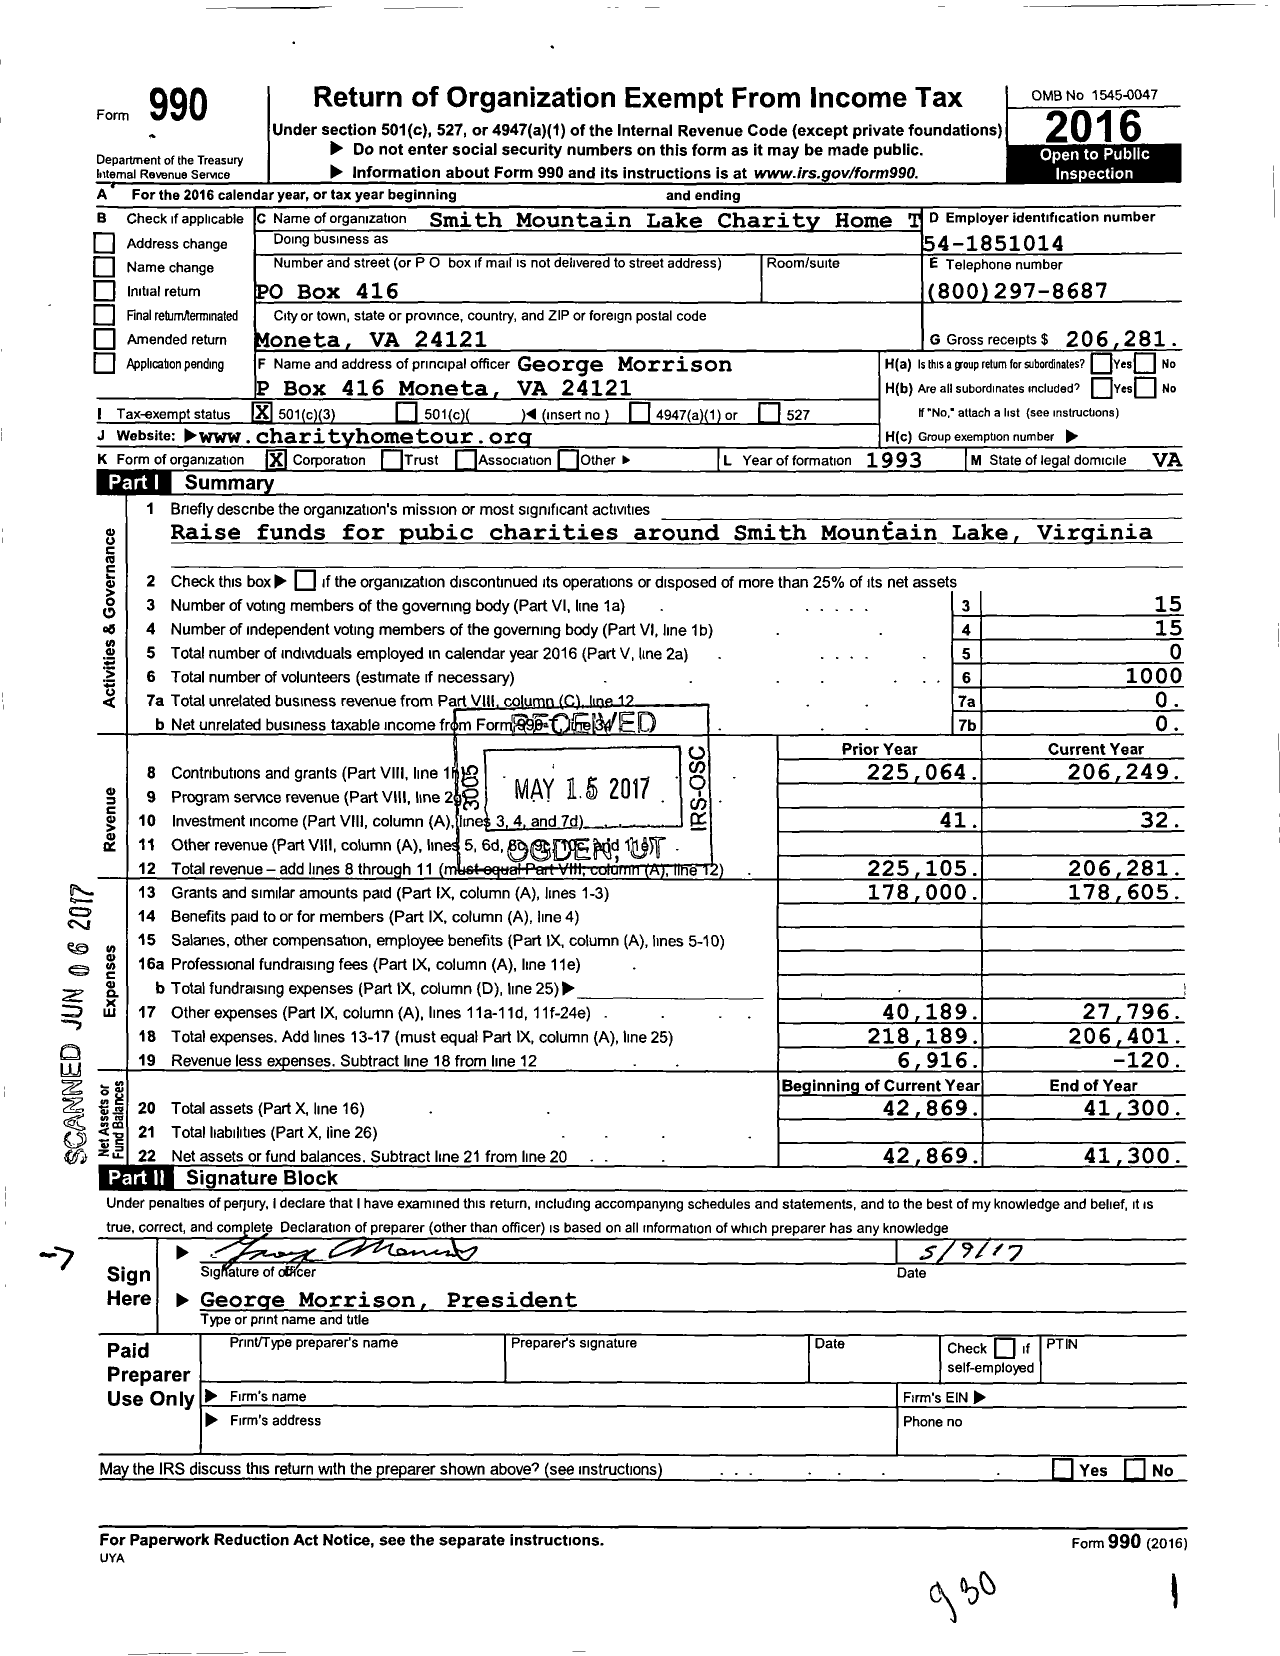 Image of first page of 2016 Form 990 for Smith Mountain Lake Charity Home Tour